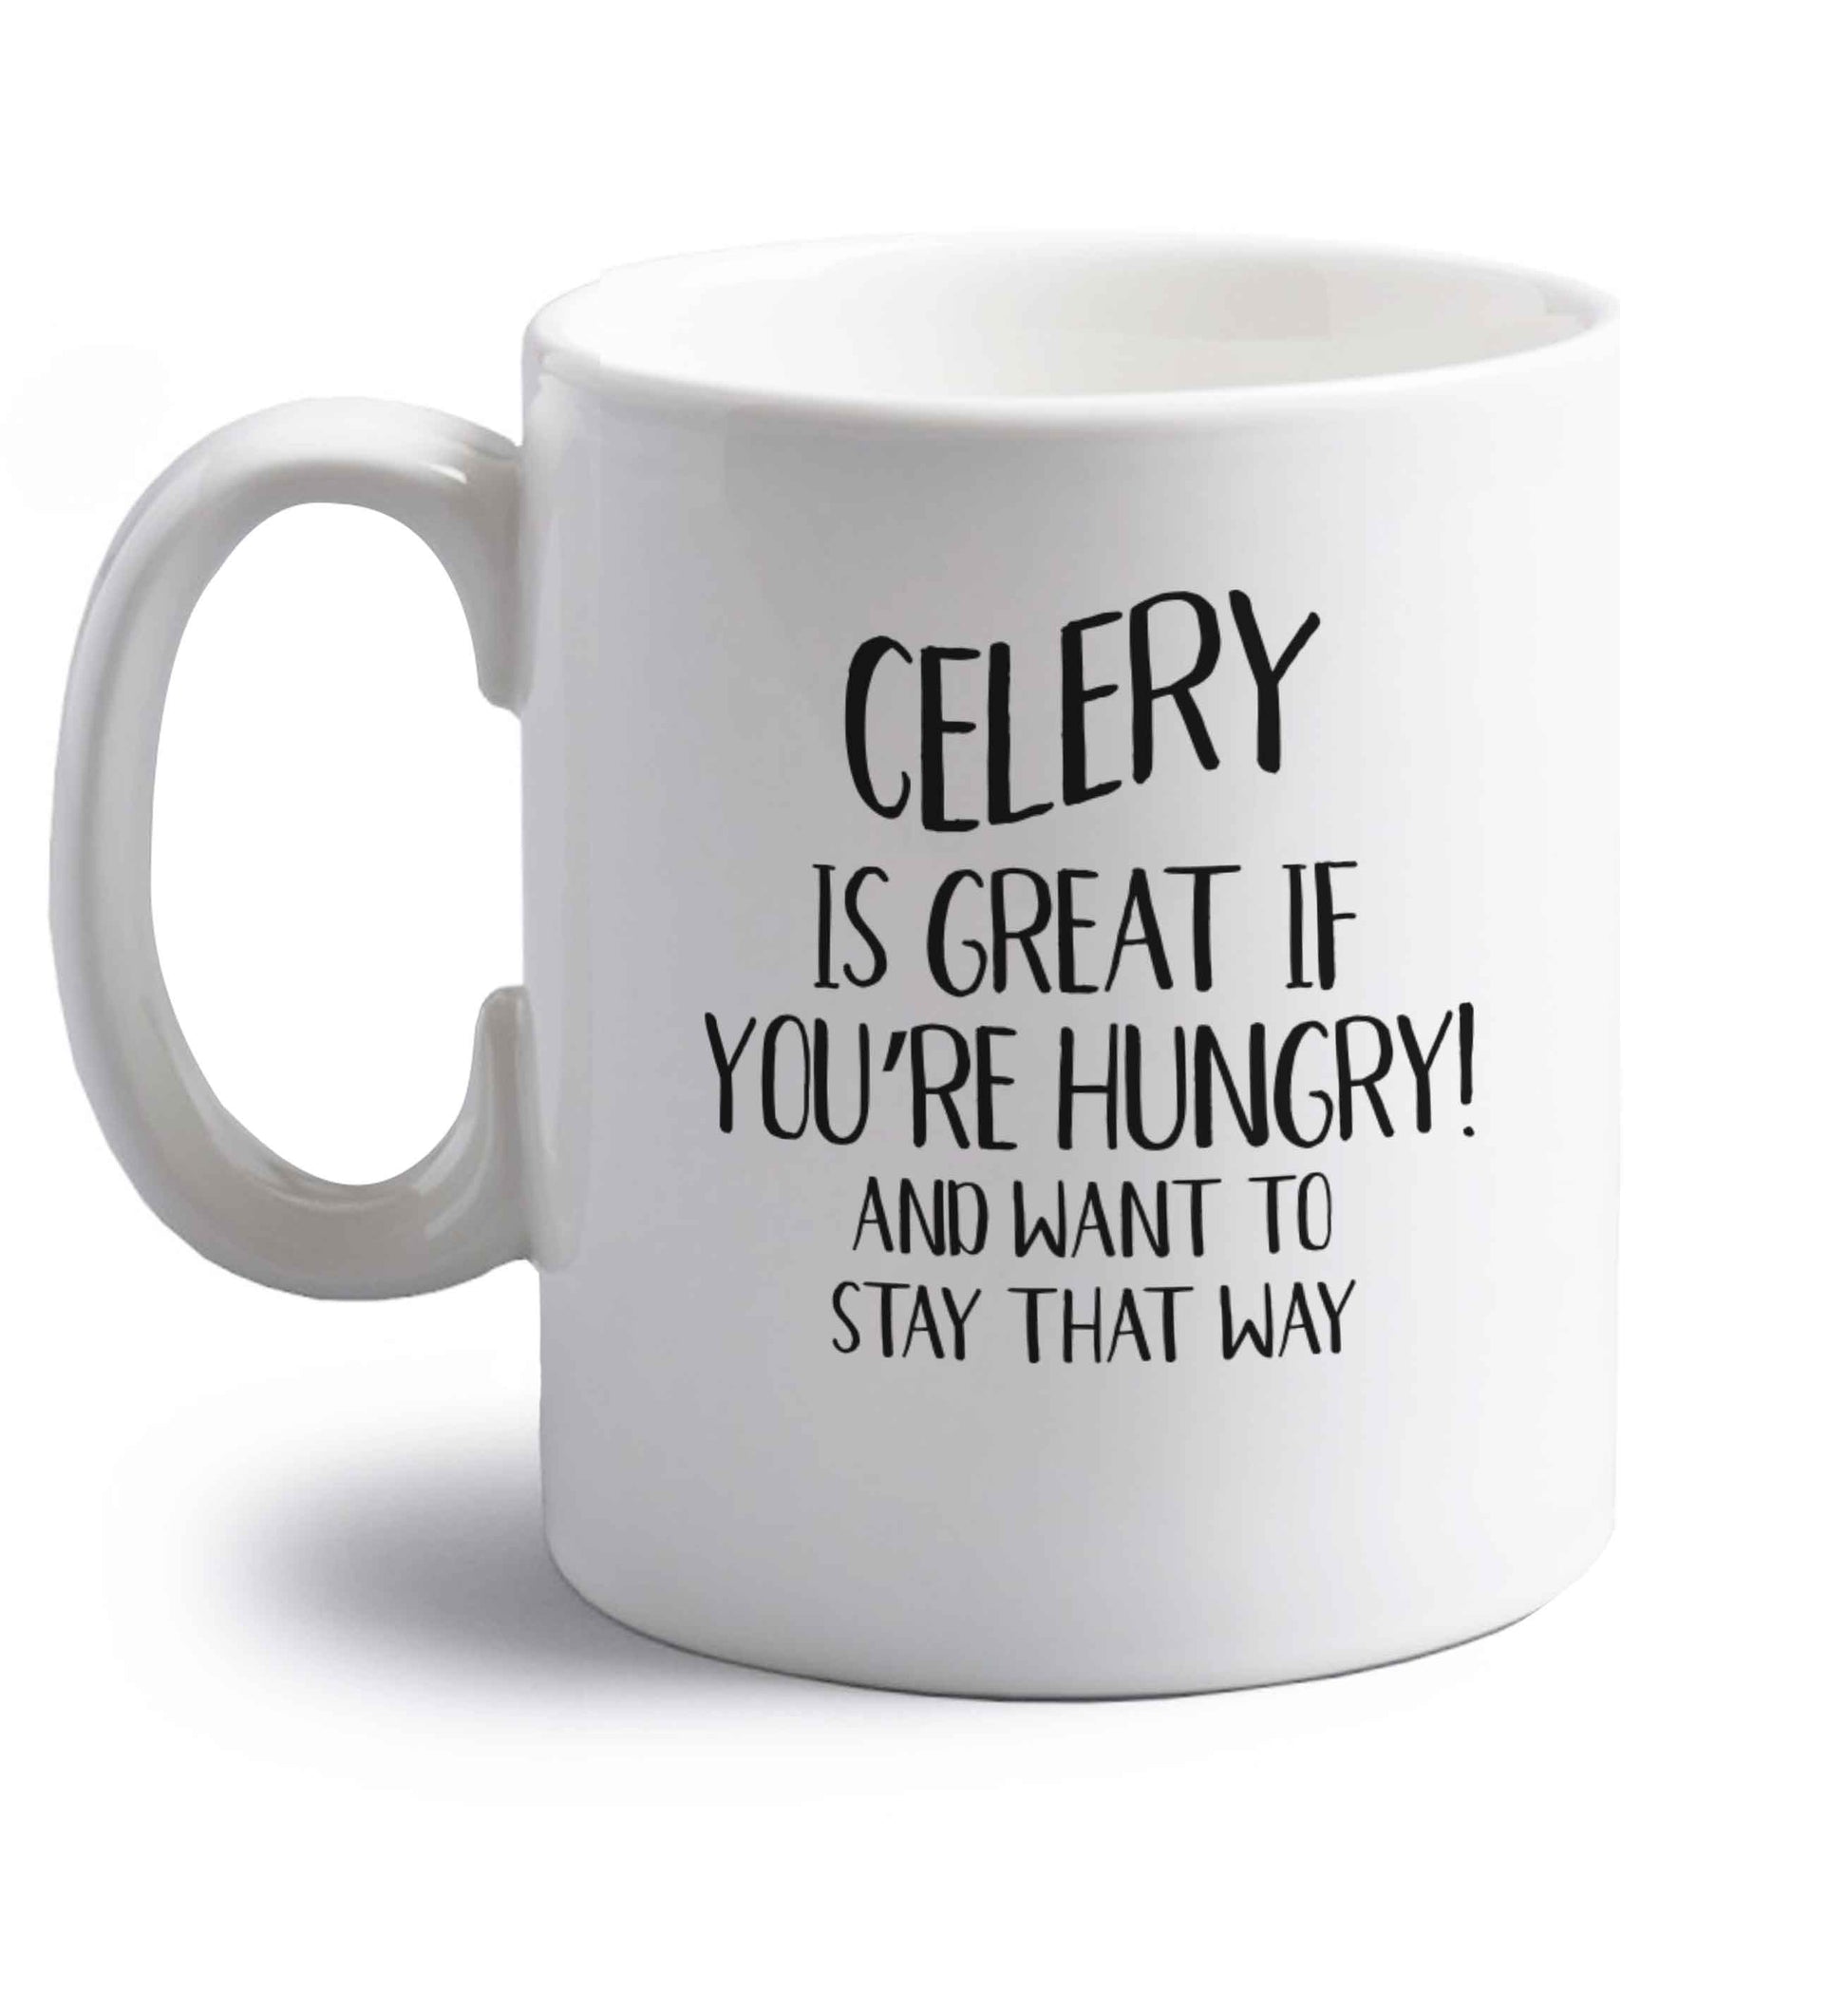 Cellery is great when you're hungry and want to stay that way right handed white ceramic mug 